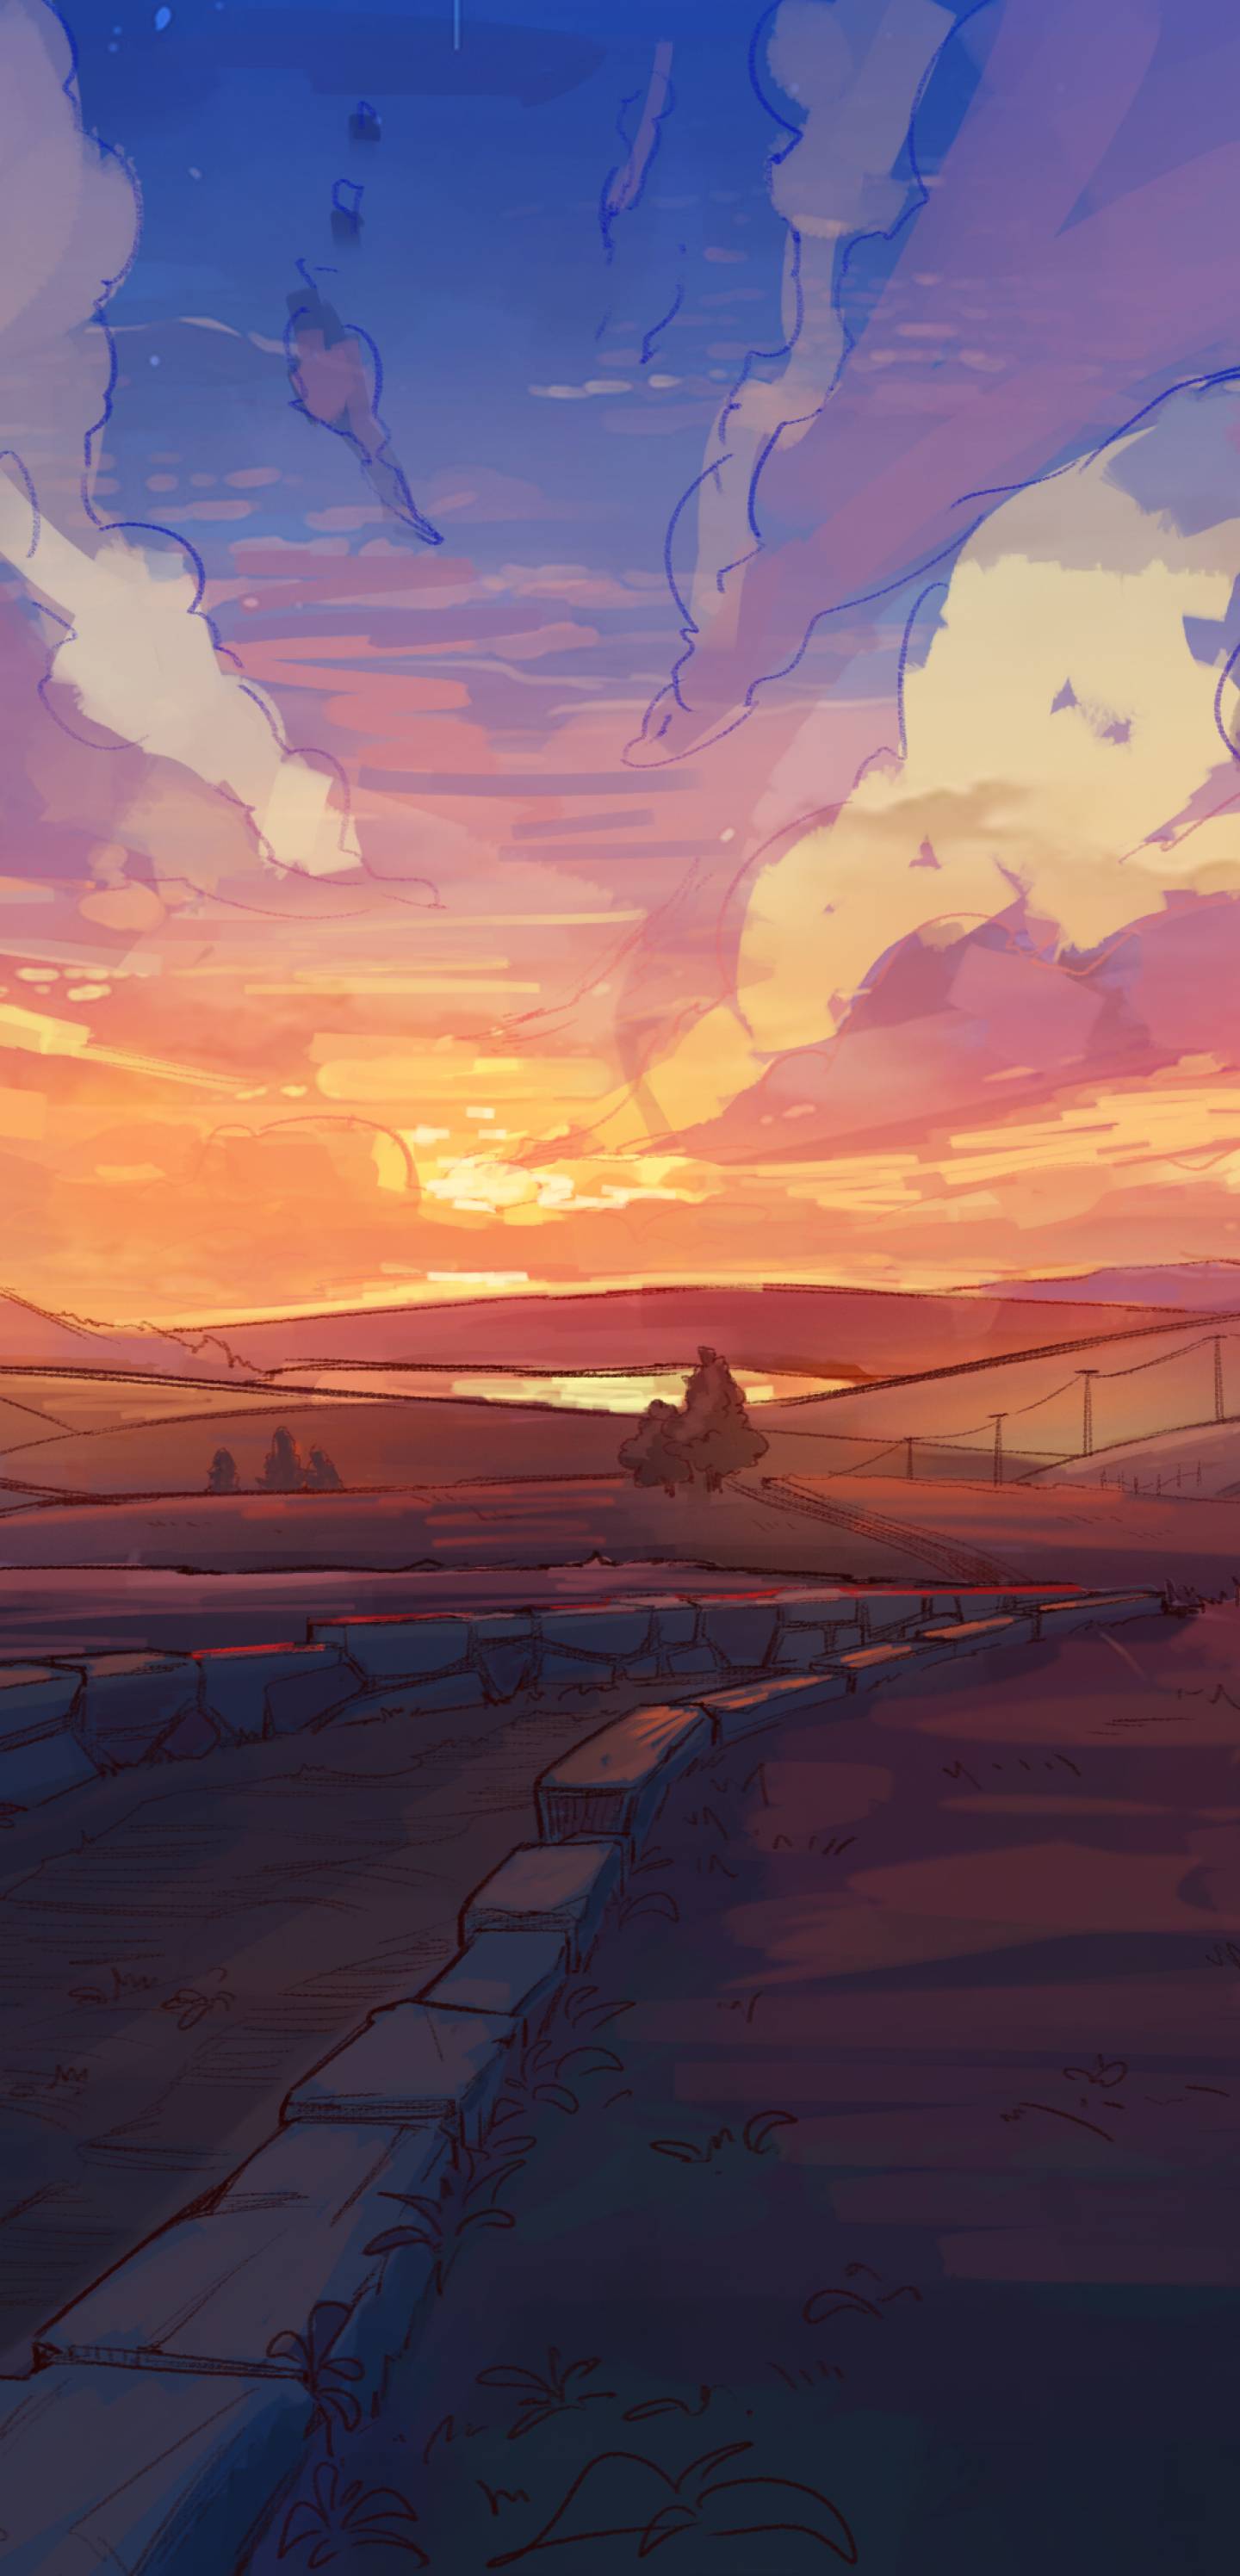 Anime scenery wallpaper 1242x2688 for your phone - Anime sunset